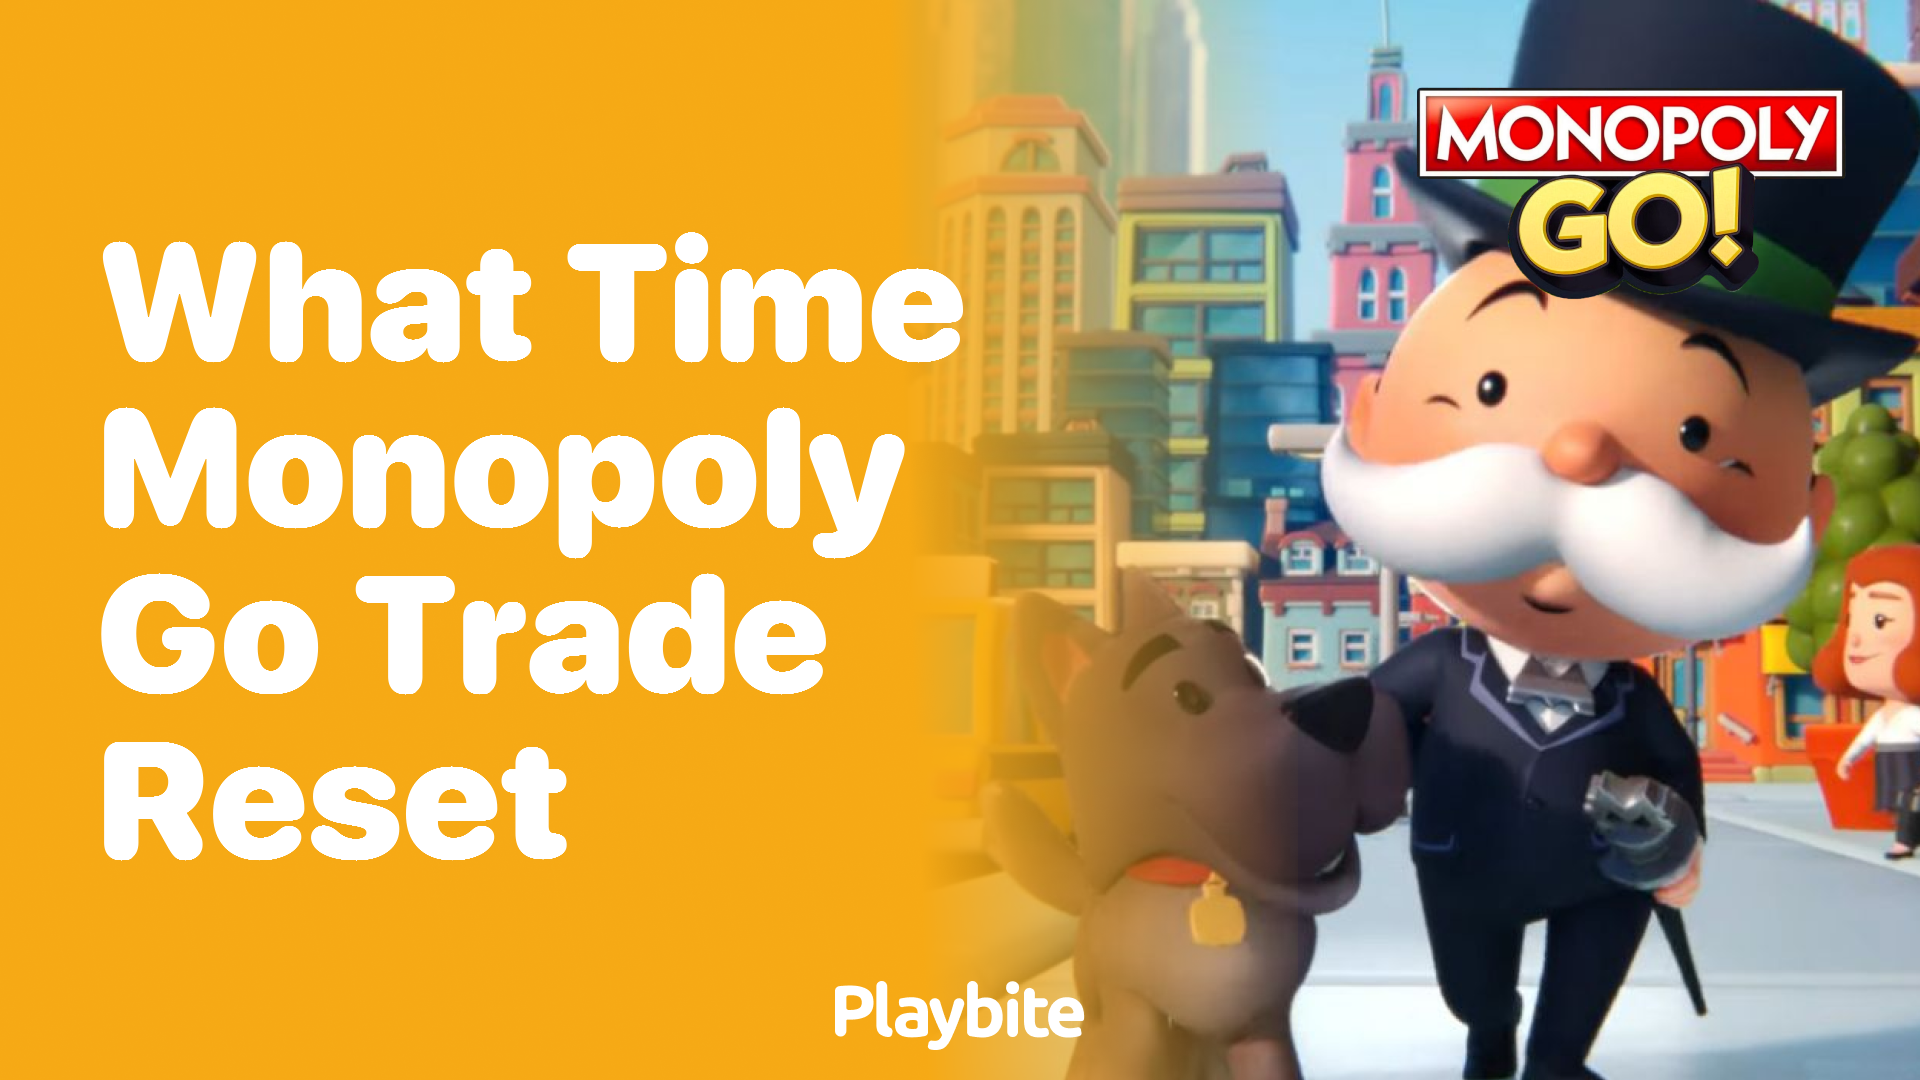 What Time Does Monopoly Go Trade Reset?